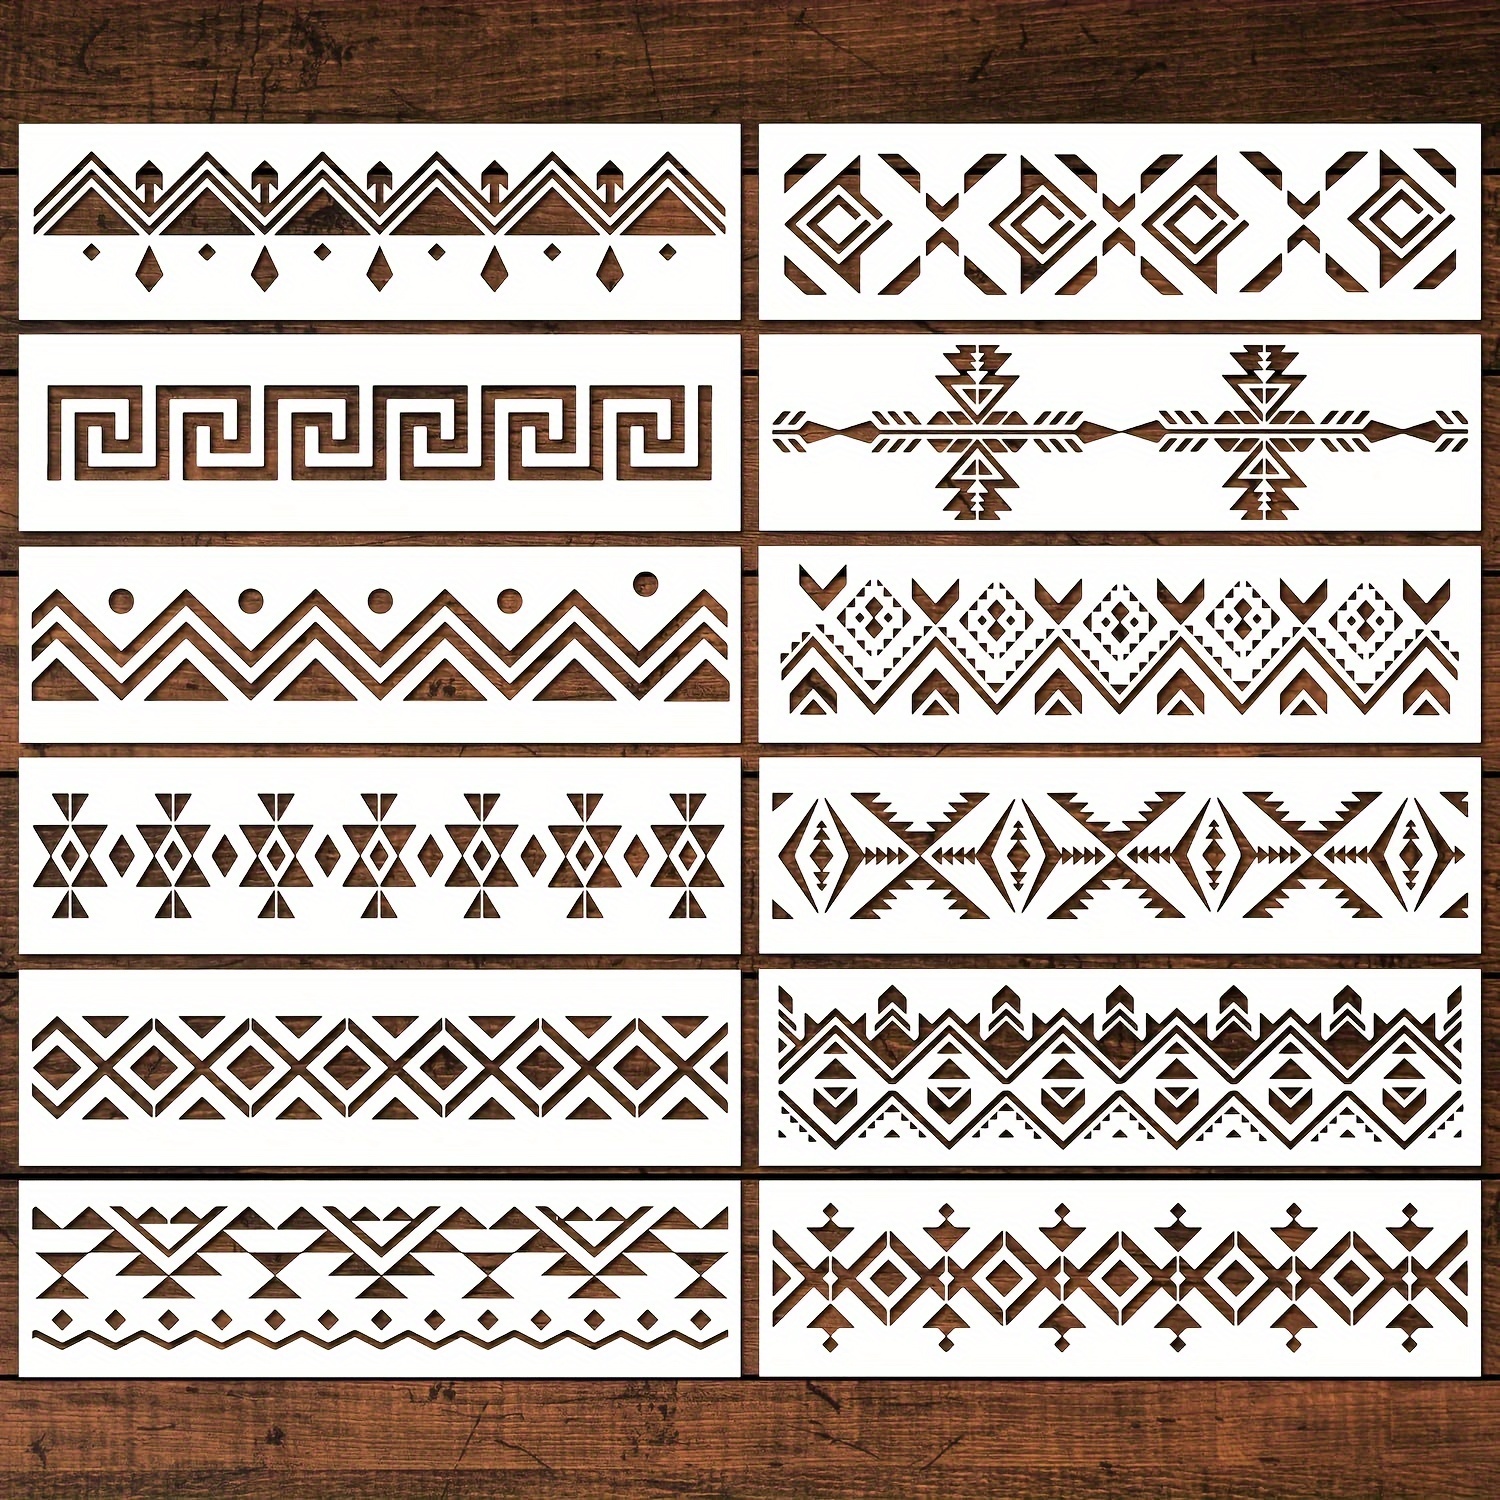 

Aztec Stencils For Painting - 12pcs Boho Borders Pattern Stencils For Painting, Reusable Diy Stencils For Painting On Wood Canvas Wall, Basic Aztec Tribal Stencils Template For Painting